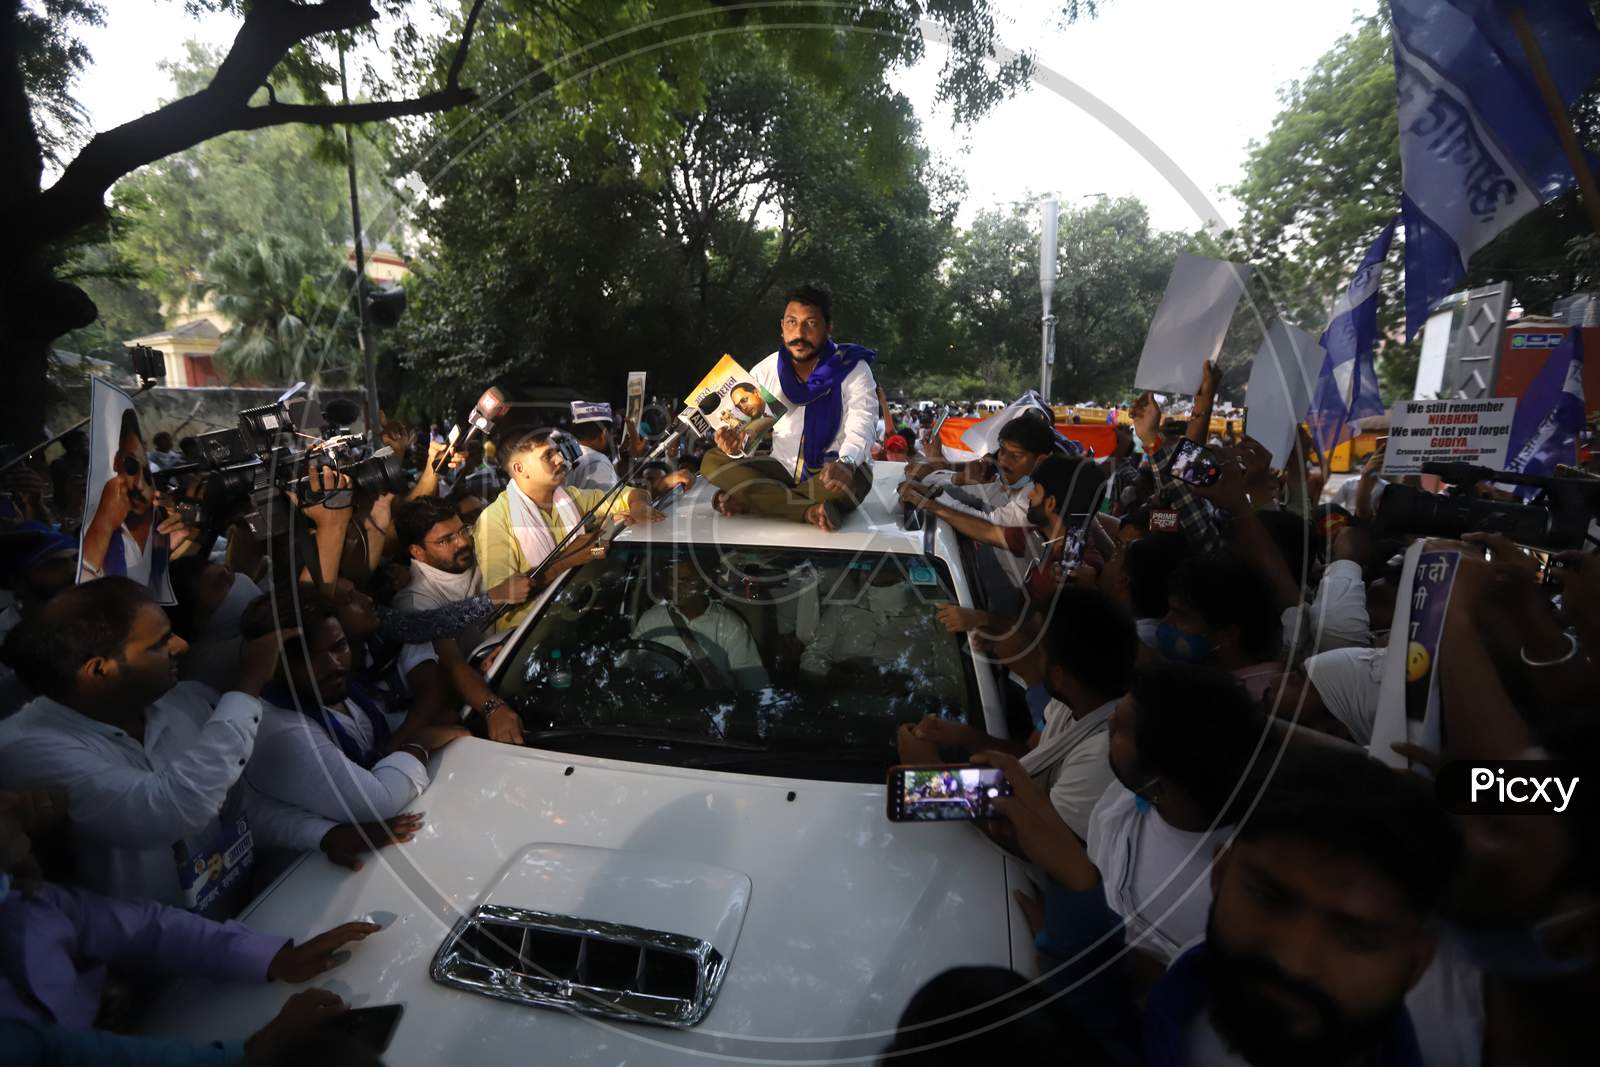 Bhim Army chief Chandrashekhar Azad addresses protesters at the citizens' protest to demand justice for Hathras Dalit victim, at Jantar Mantar, on October 2, 2020 in New Delhi, India.